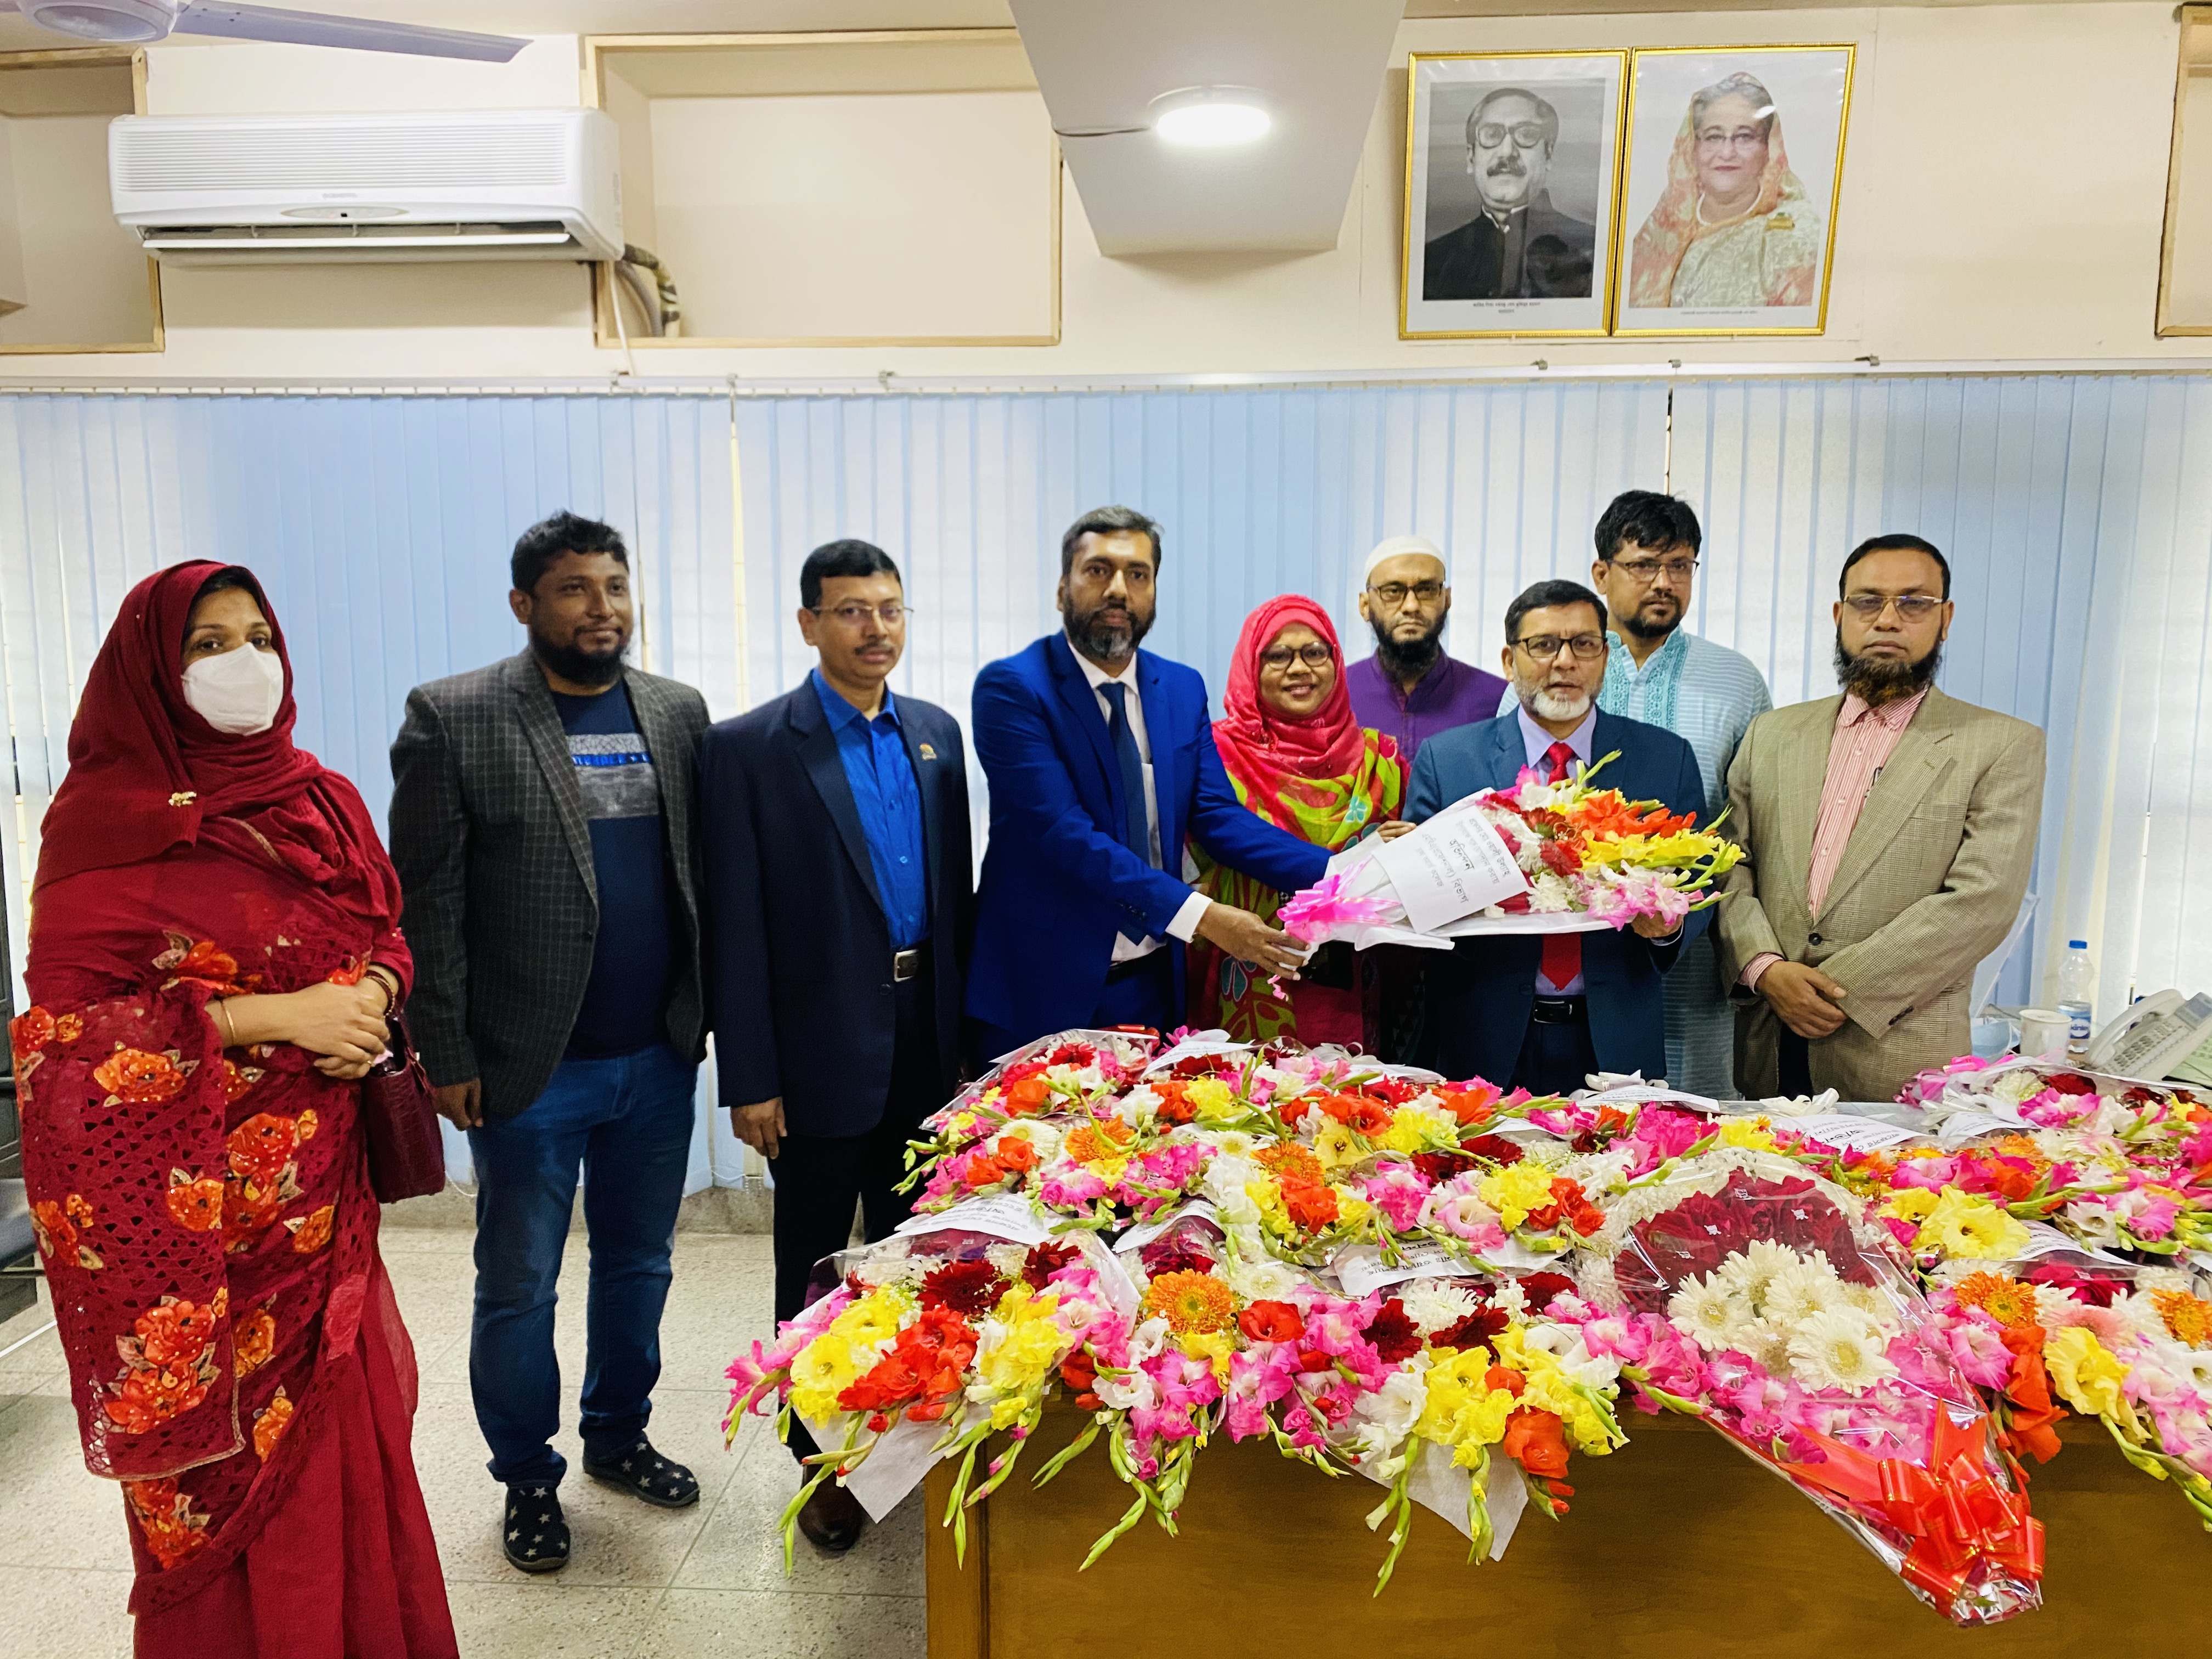 Reception to Vice Principal Prof. Md. Wali Ullah by MBA Program Department